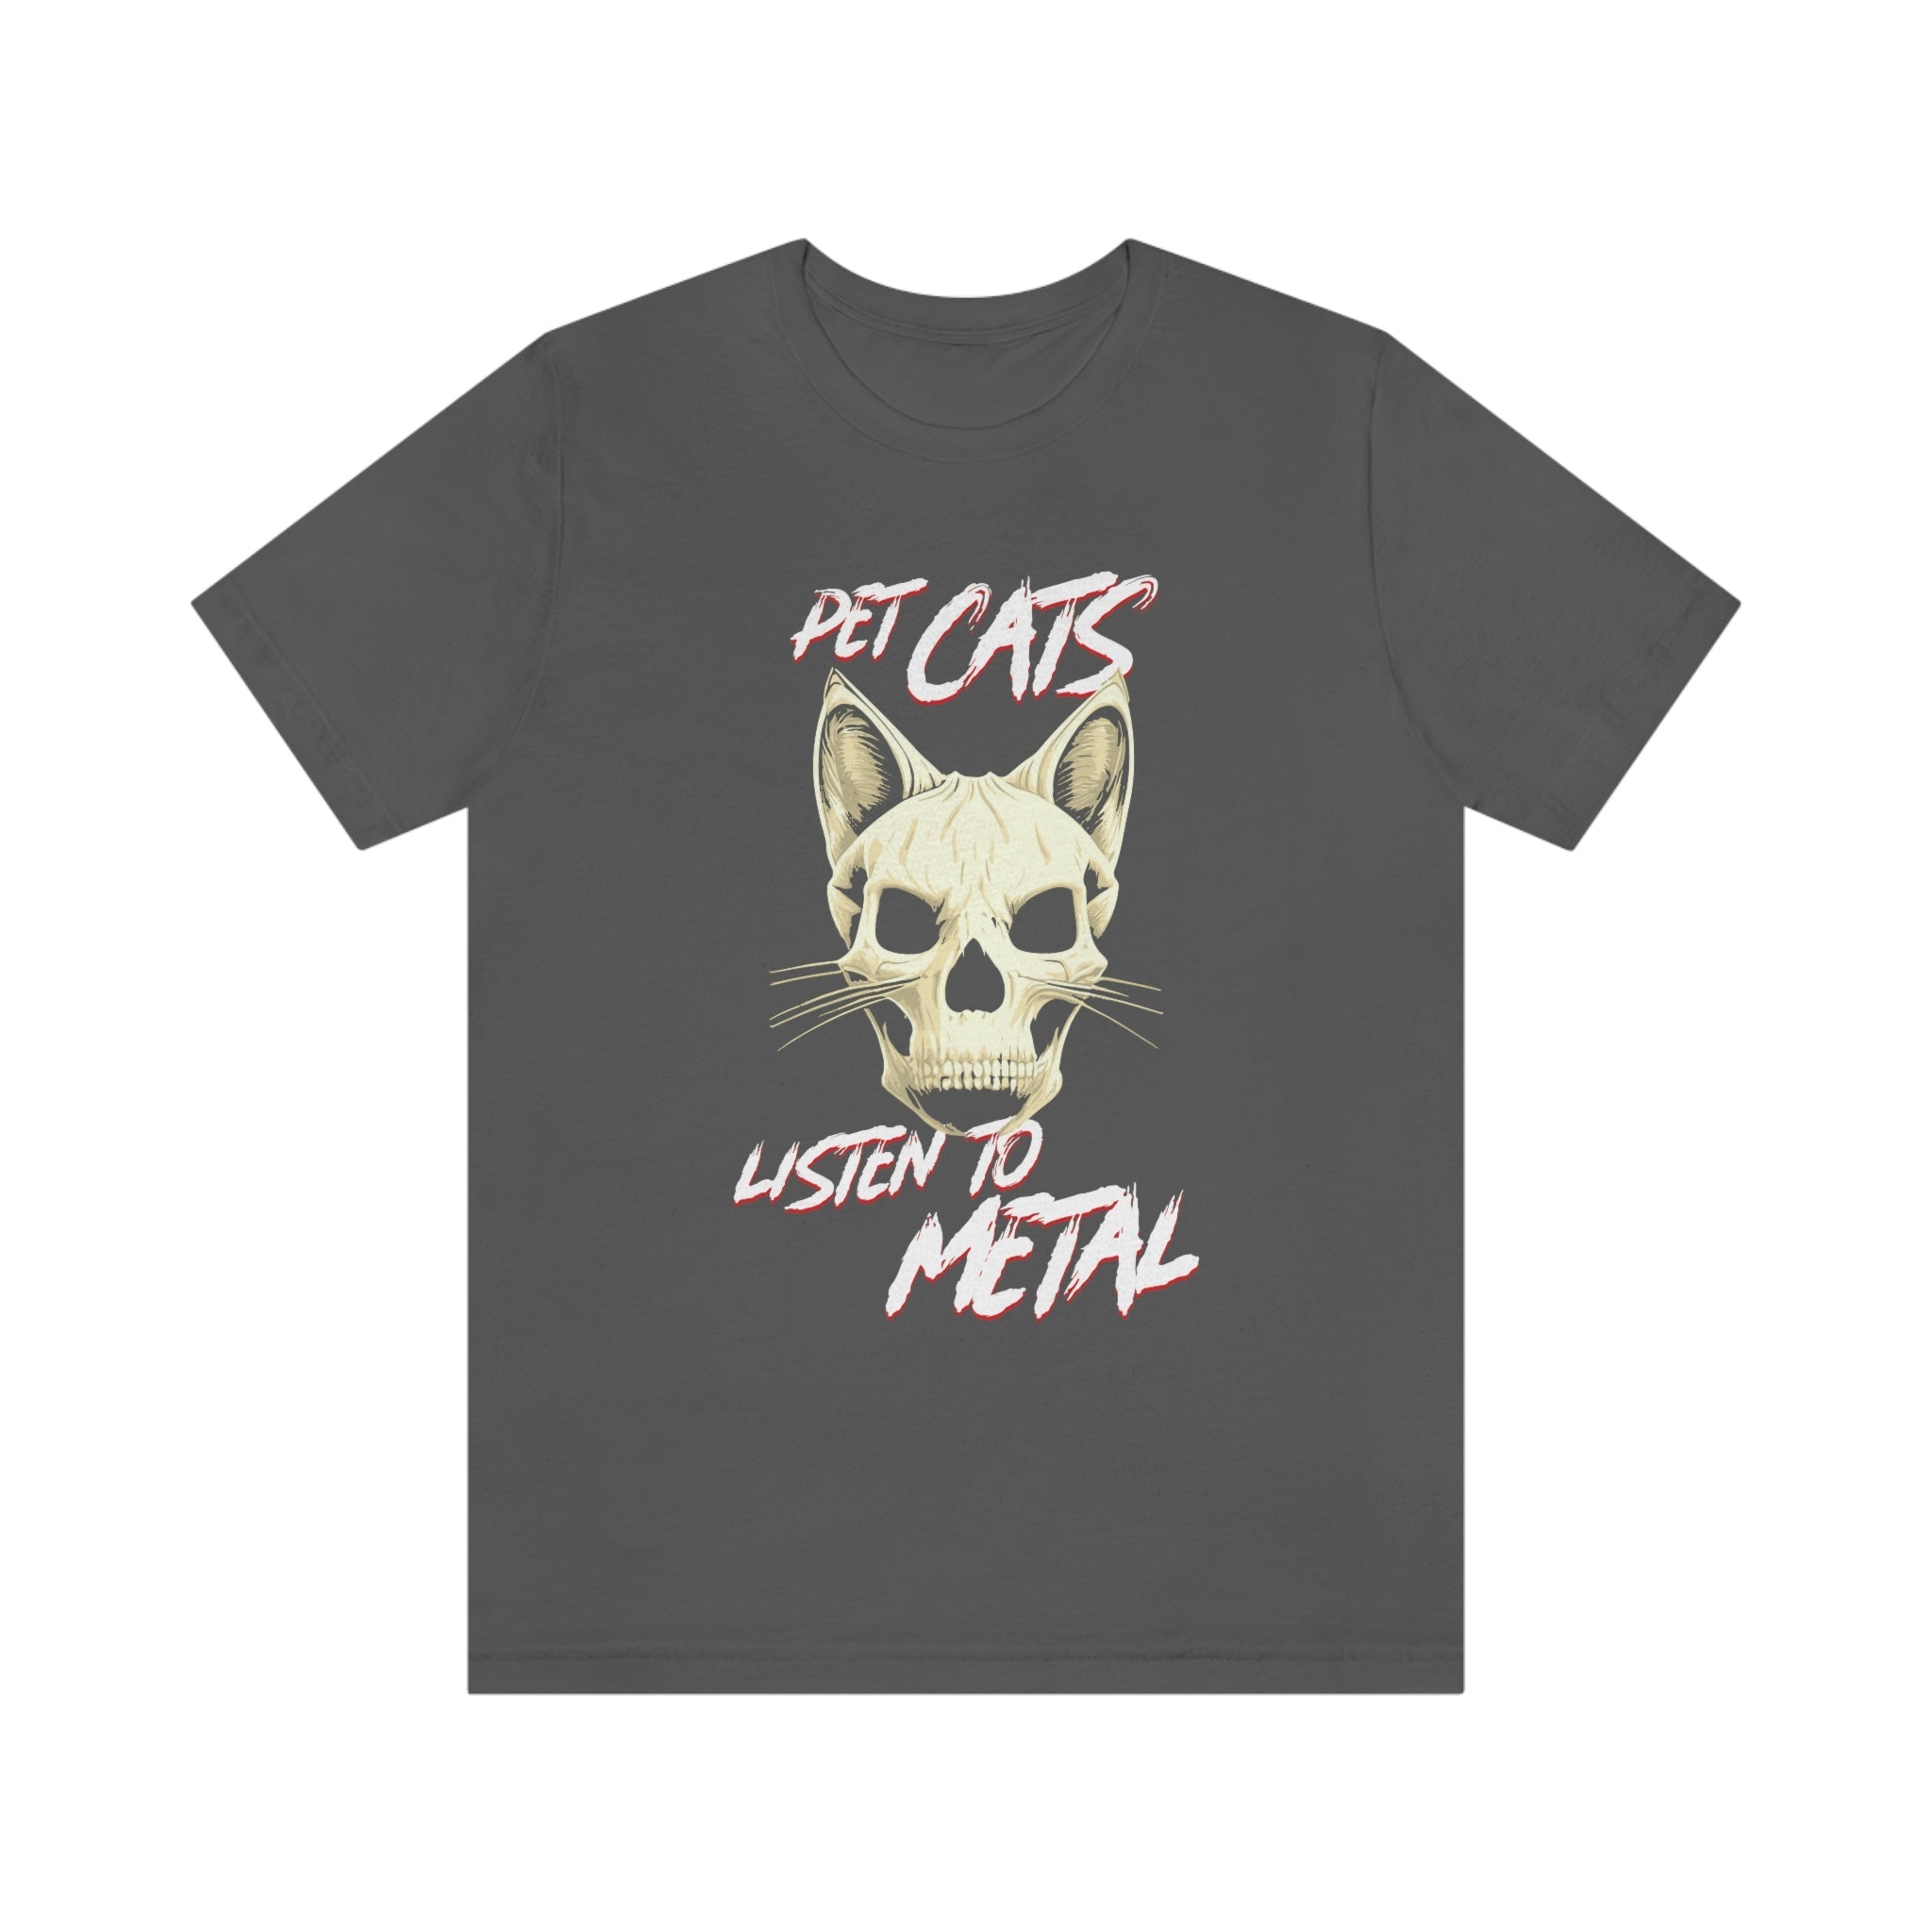 Pet cats, Listen to Metal : Unisex 100% Cotton T-Shirt by Bella+Canvas - Double Sided!!!